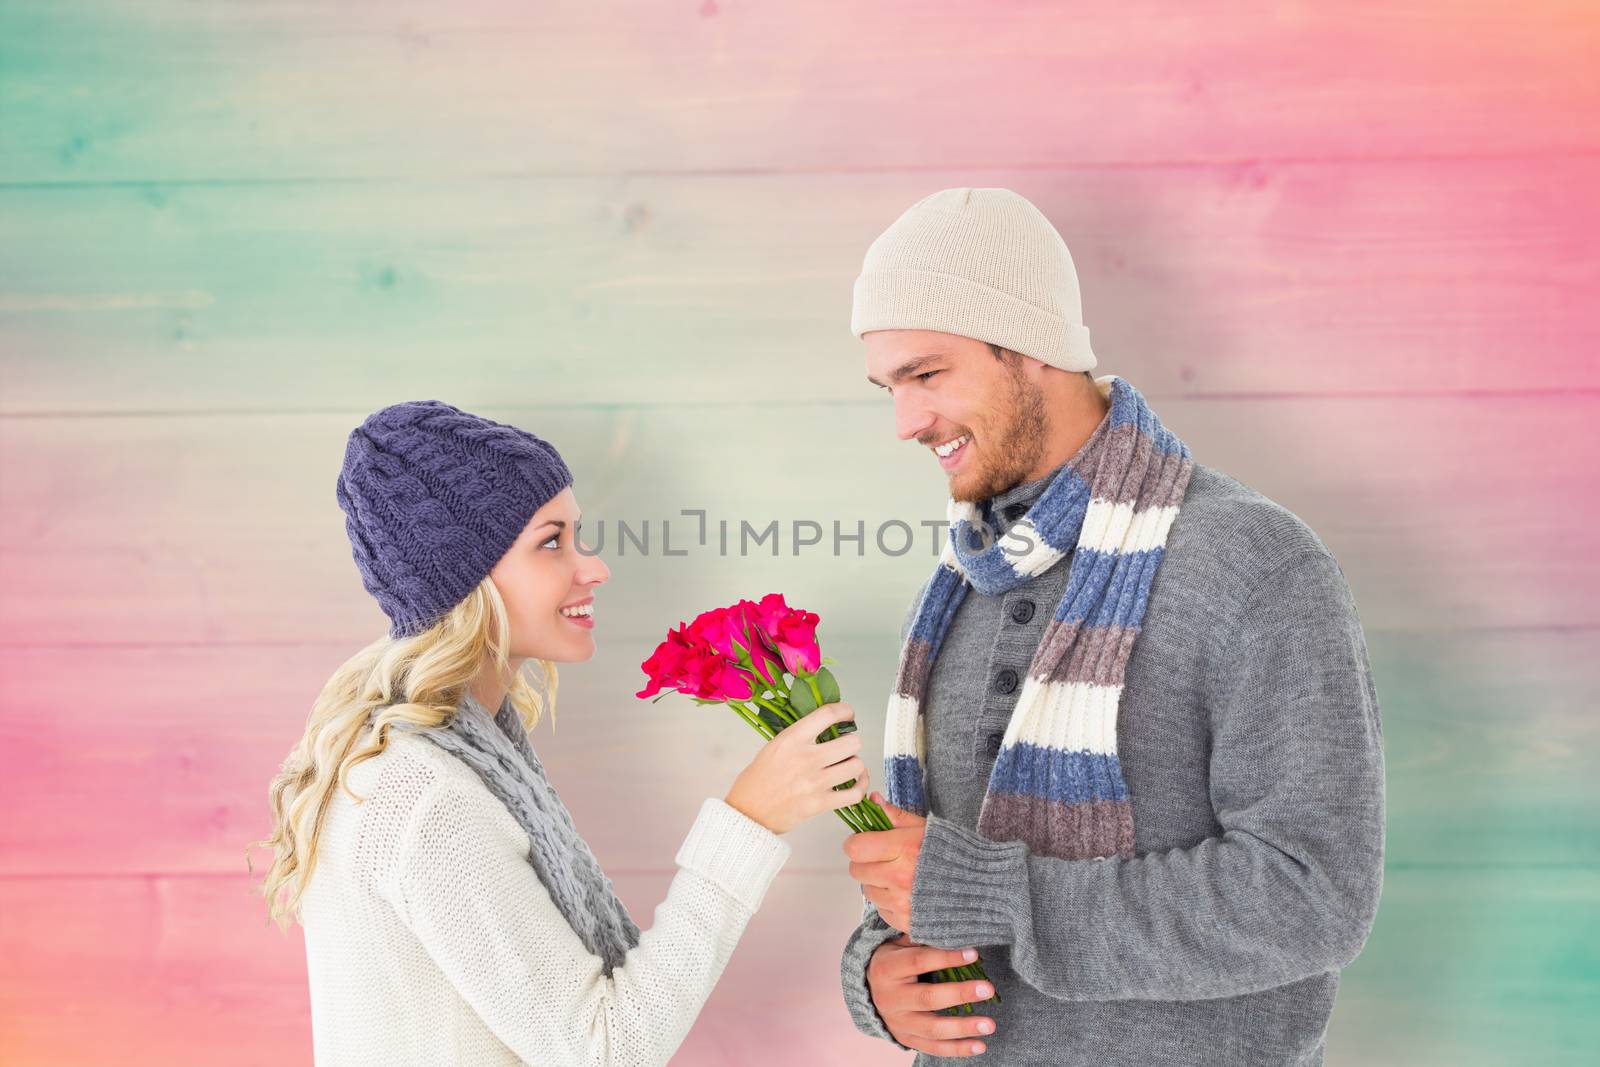 Composite image of attractive man in winter fashion offering roses to girlfriend by Wavebreakmedia